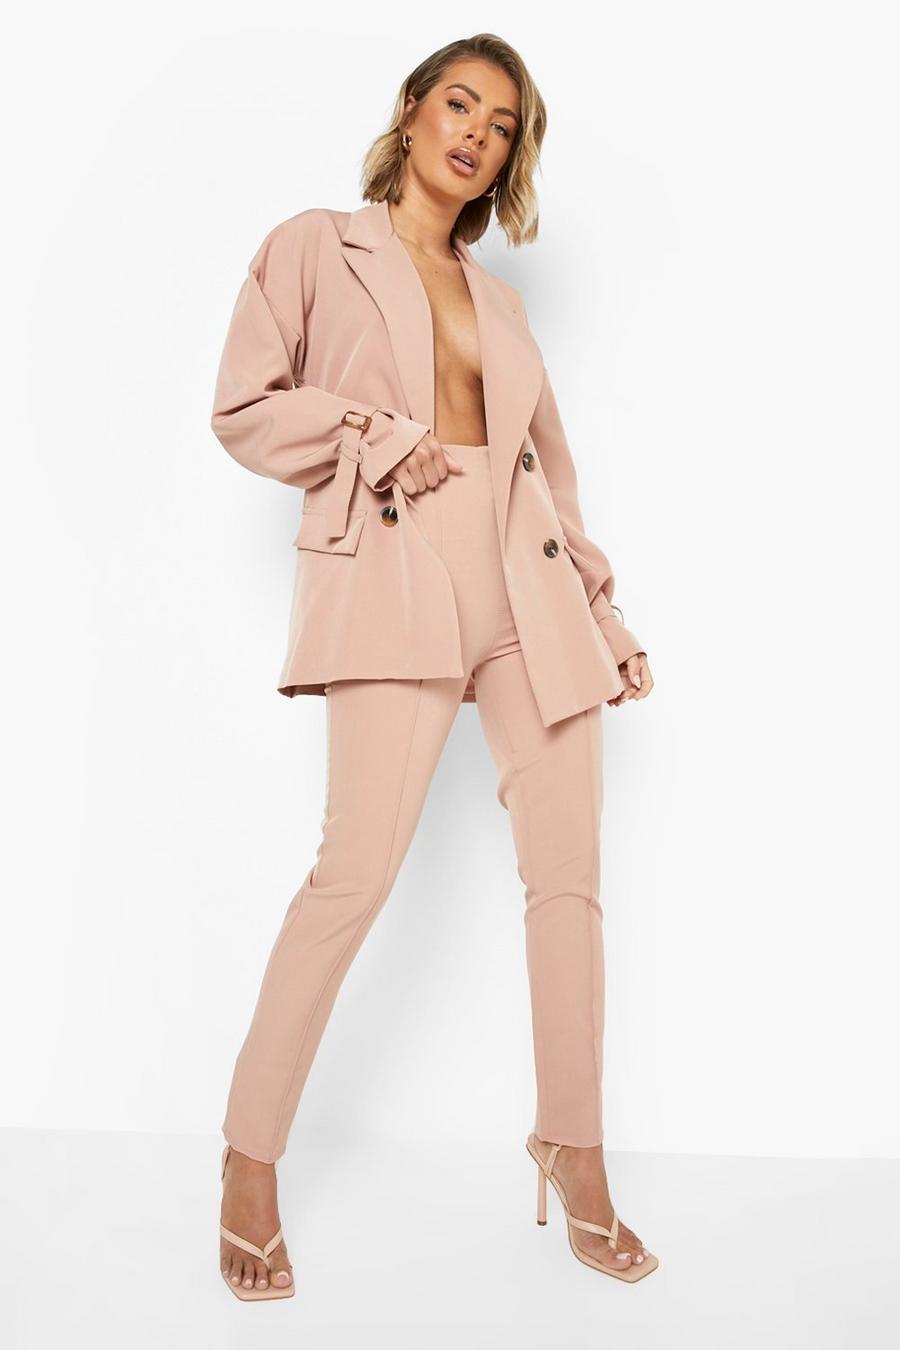 Nude Seam Front Ankle Grazer Dress Pants